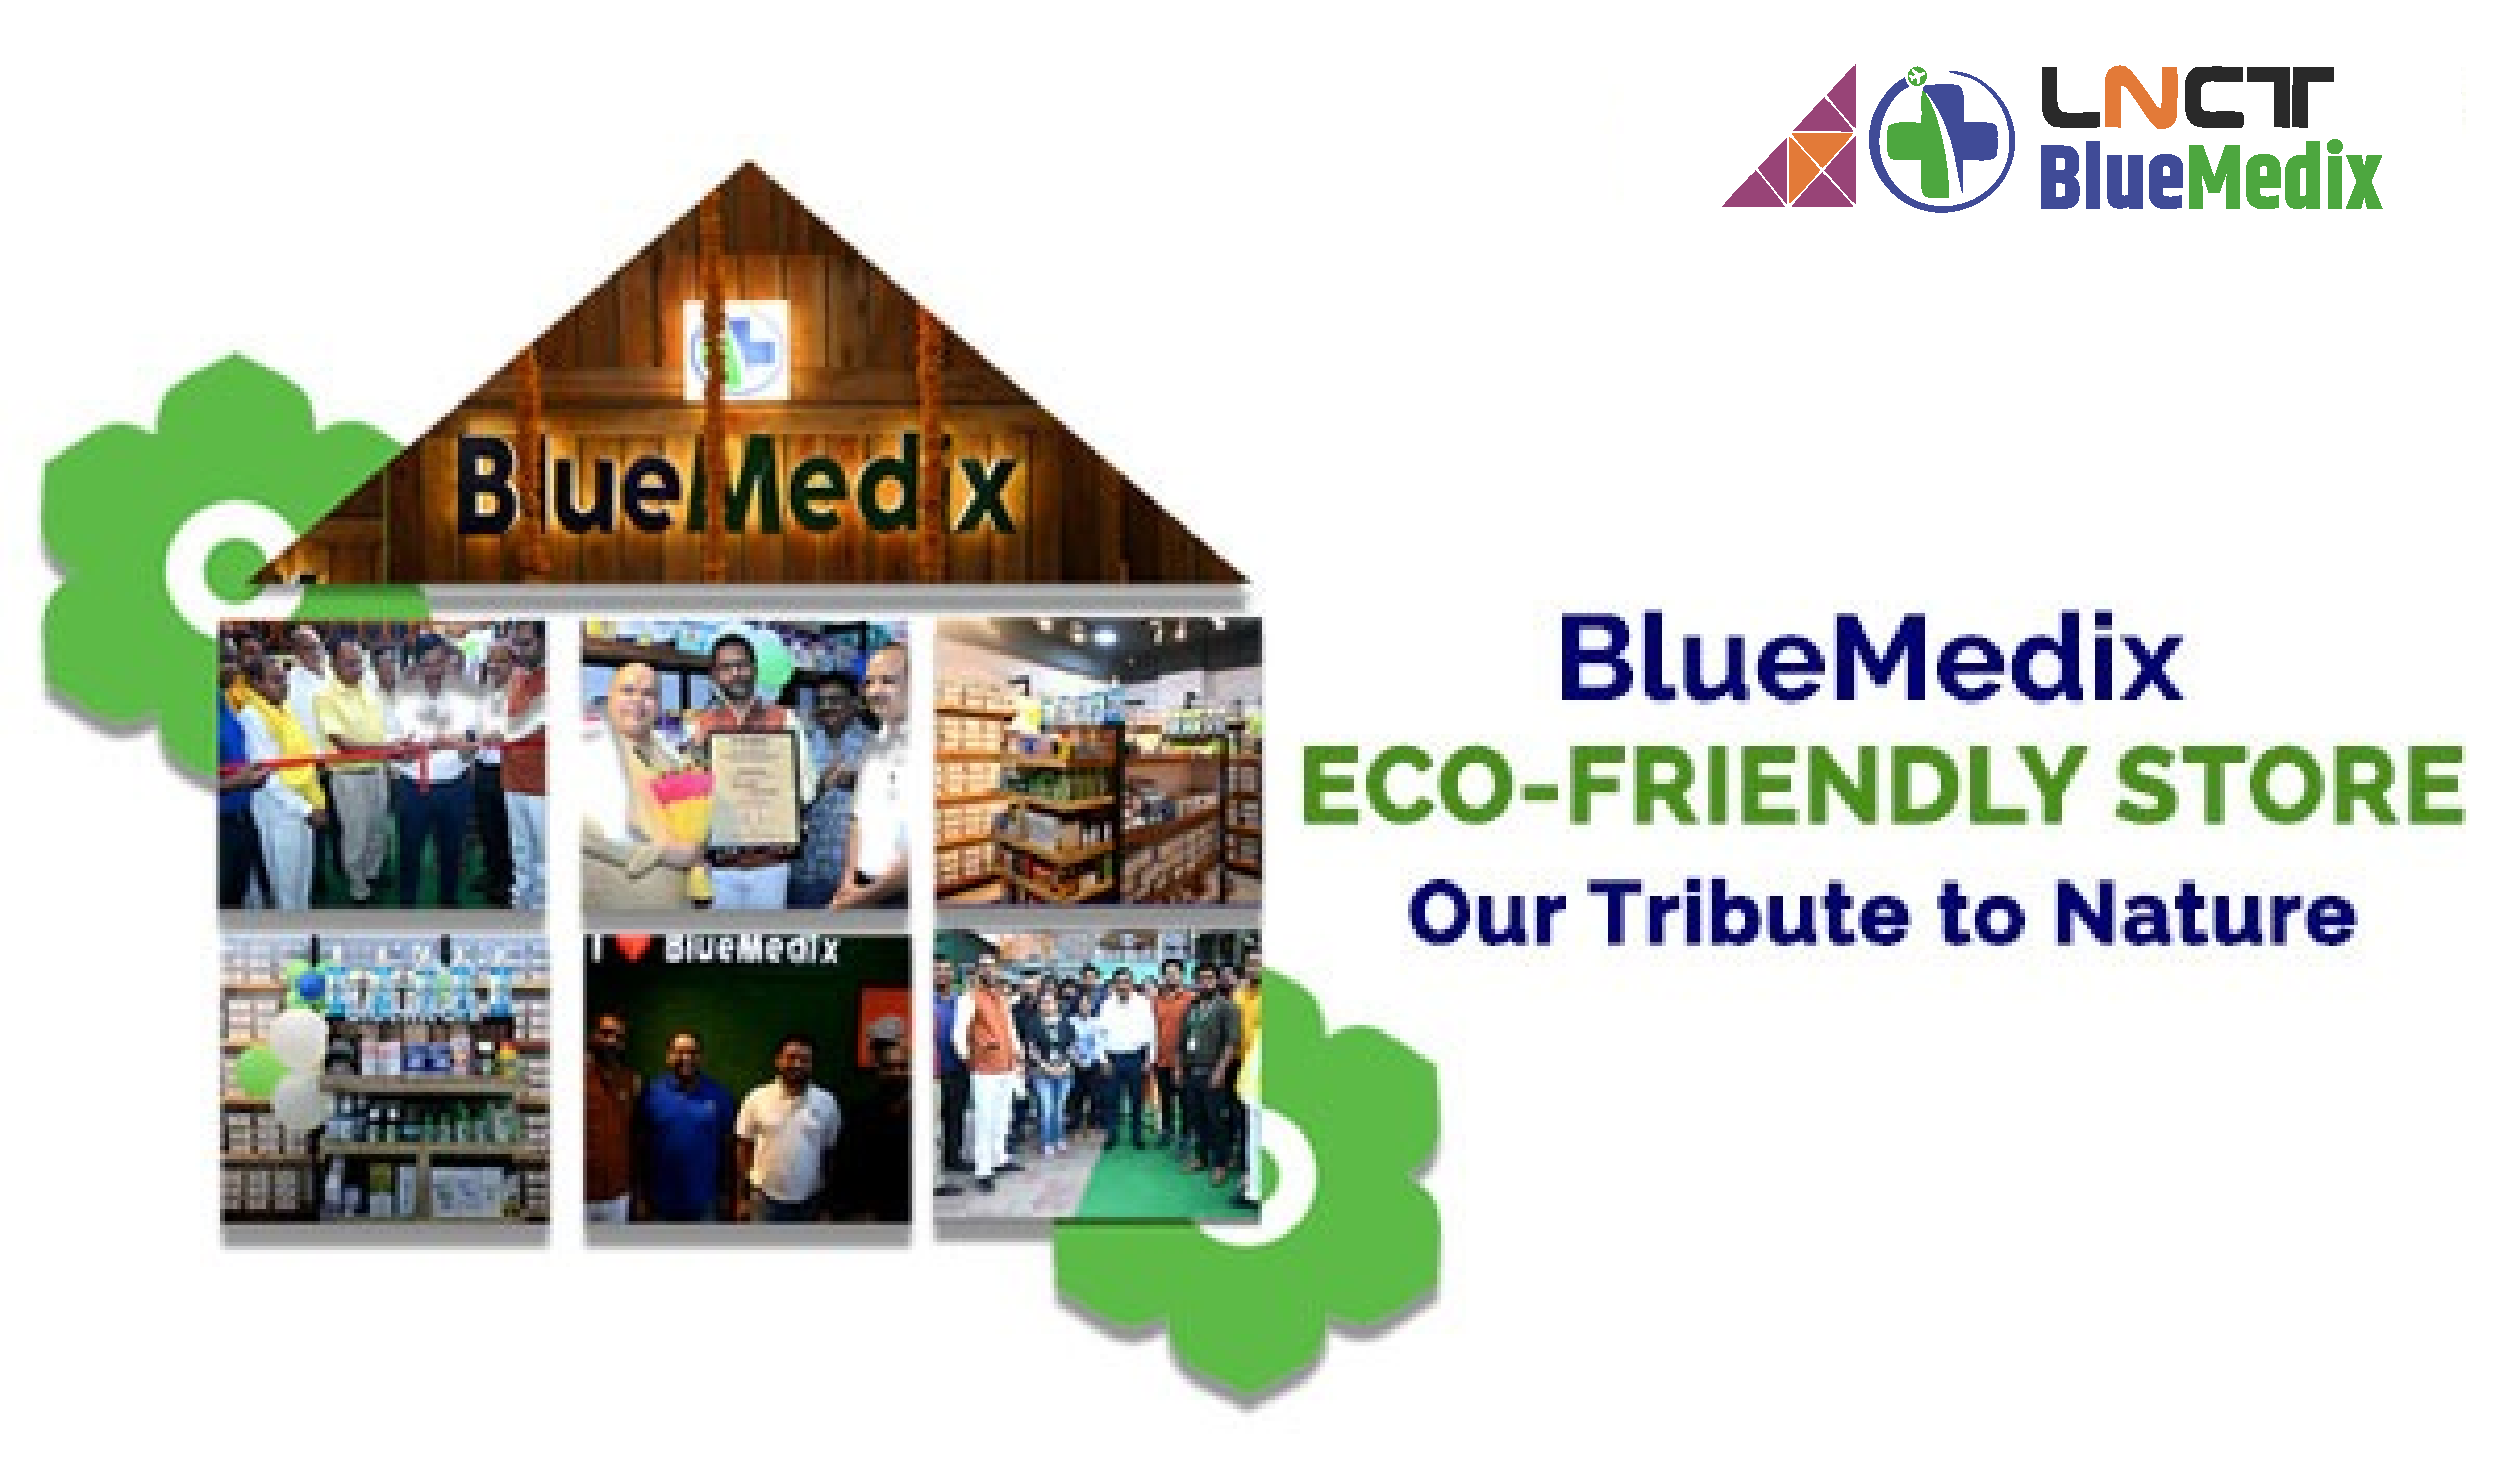 BlueMedix Eco-friendly Store - Our Tribute to Nature